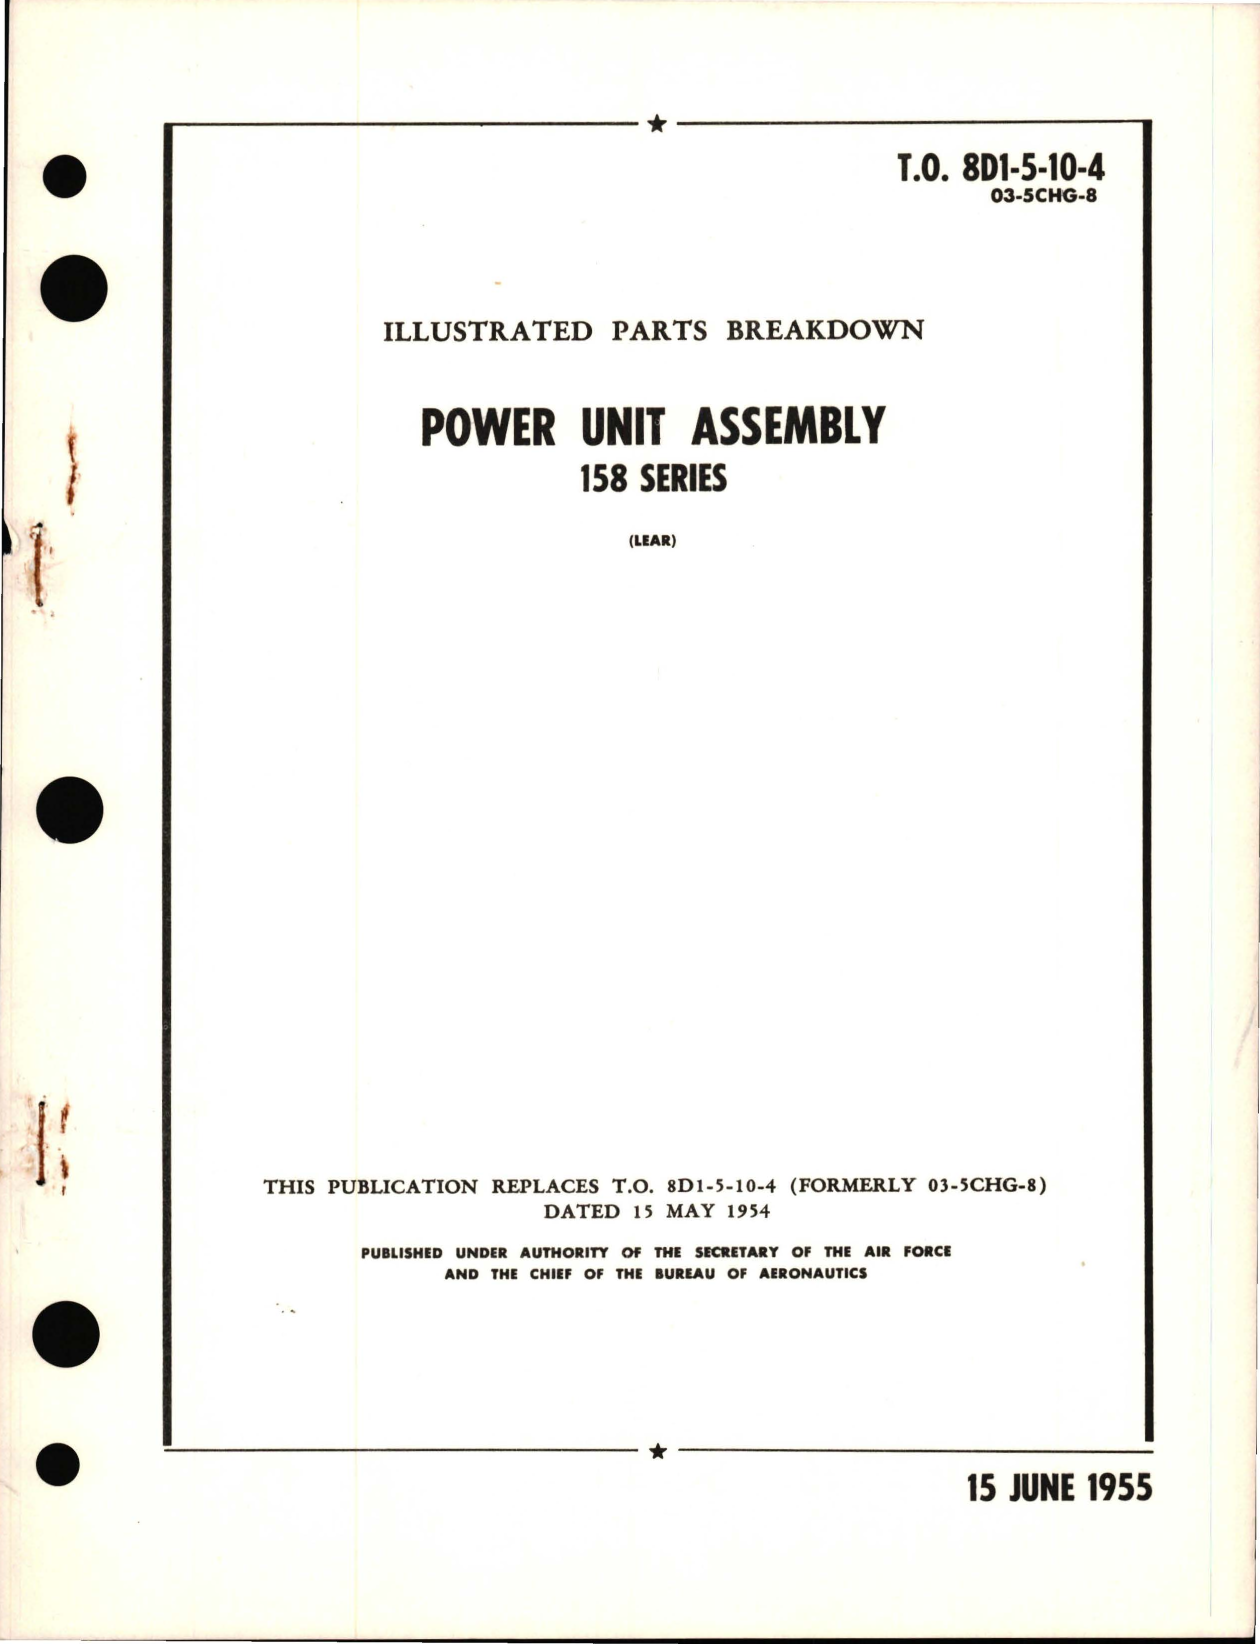 Sample page 1 from AirCorps Library document: Illustrated Parts Breakdown for Power Unit Assembly 158 Series